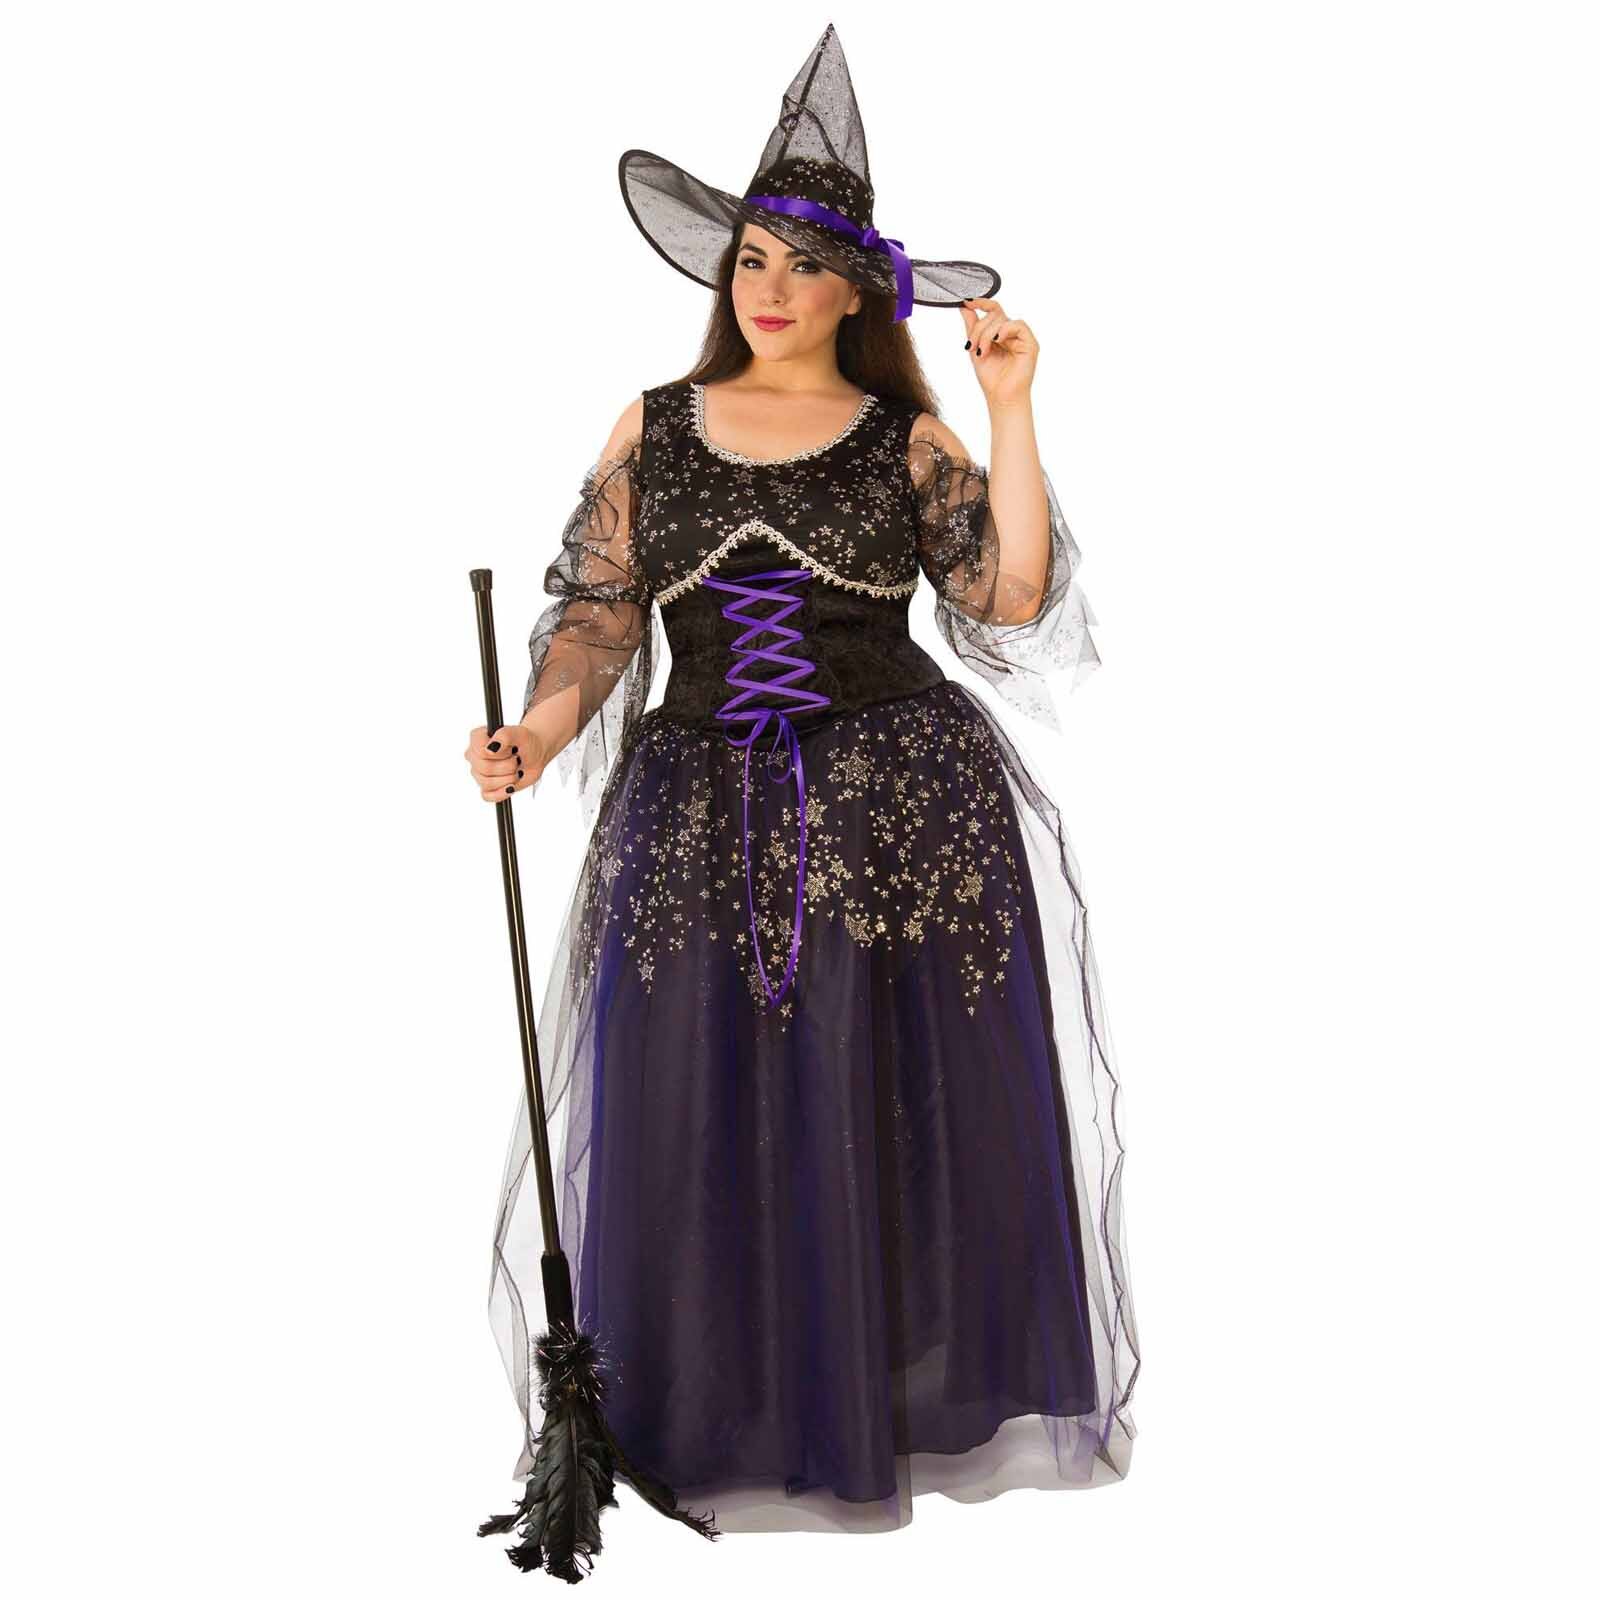 Midnight Witch Costume - Adult Plus Size.